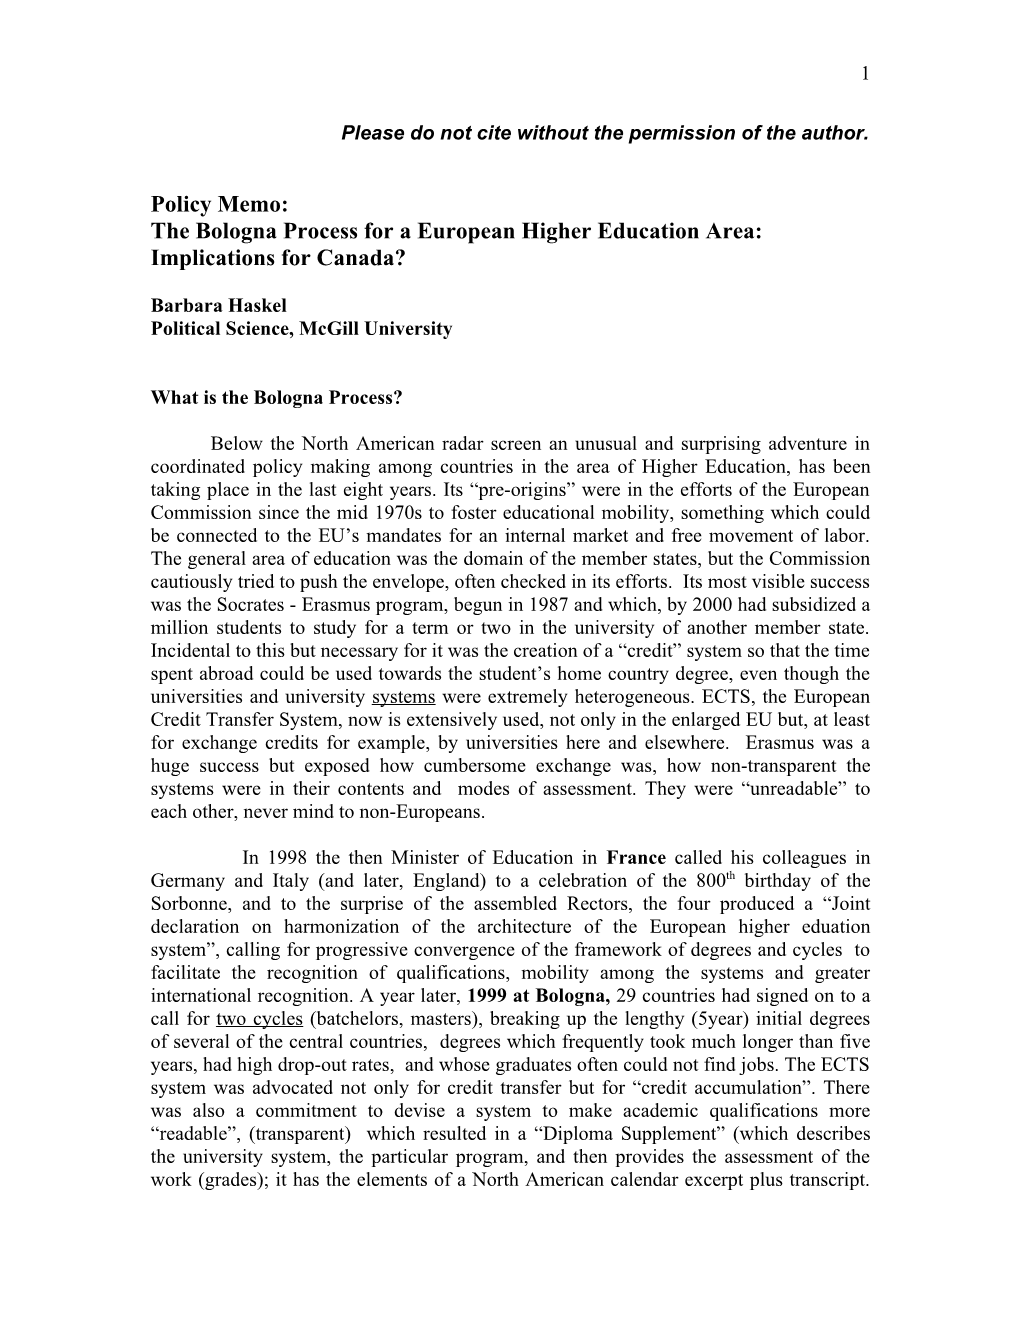 The Bologna Process for a European Higher Education Area: Implications for Canada?